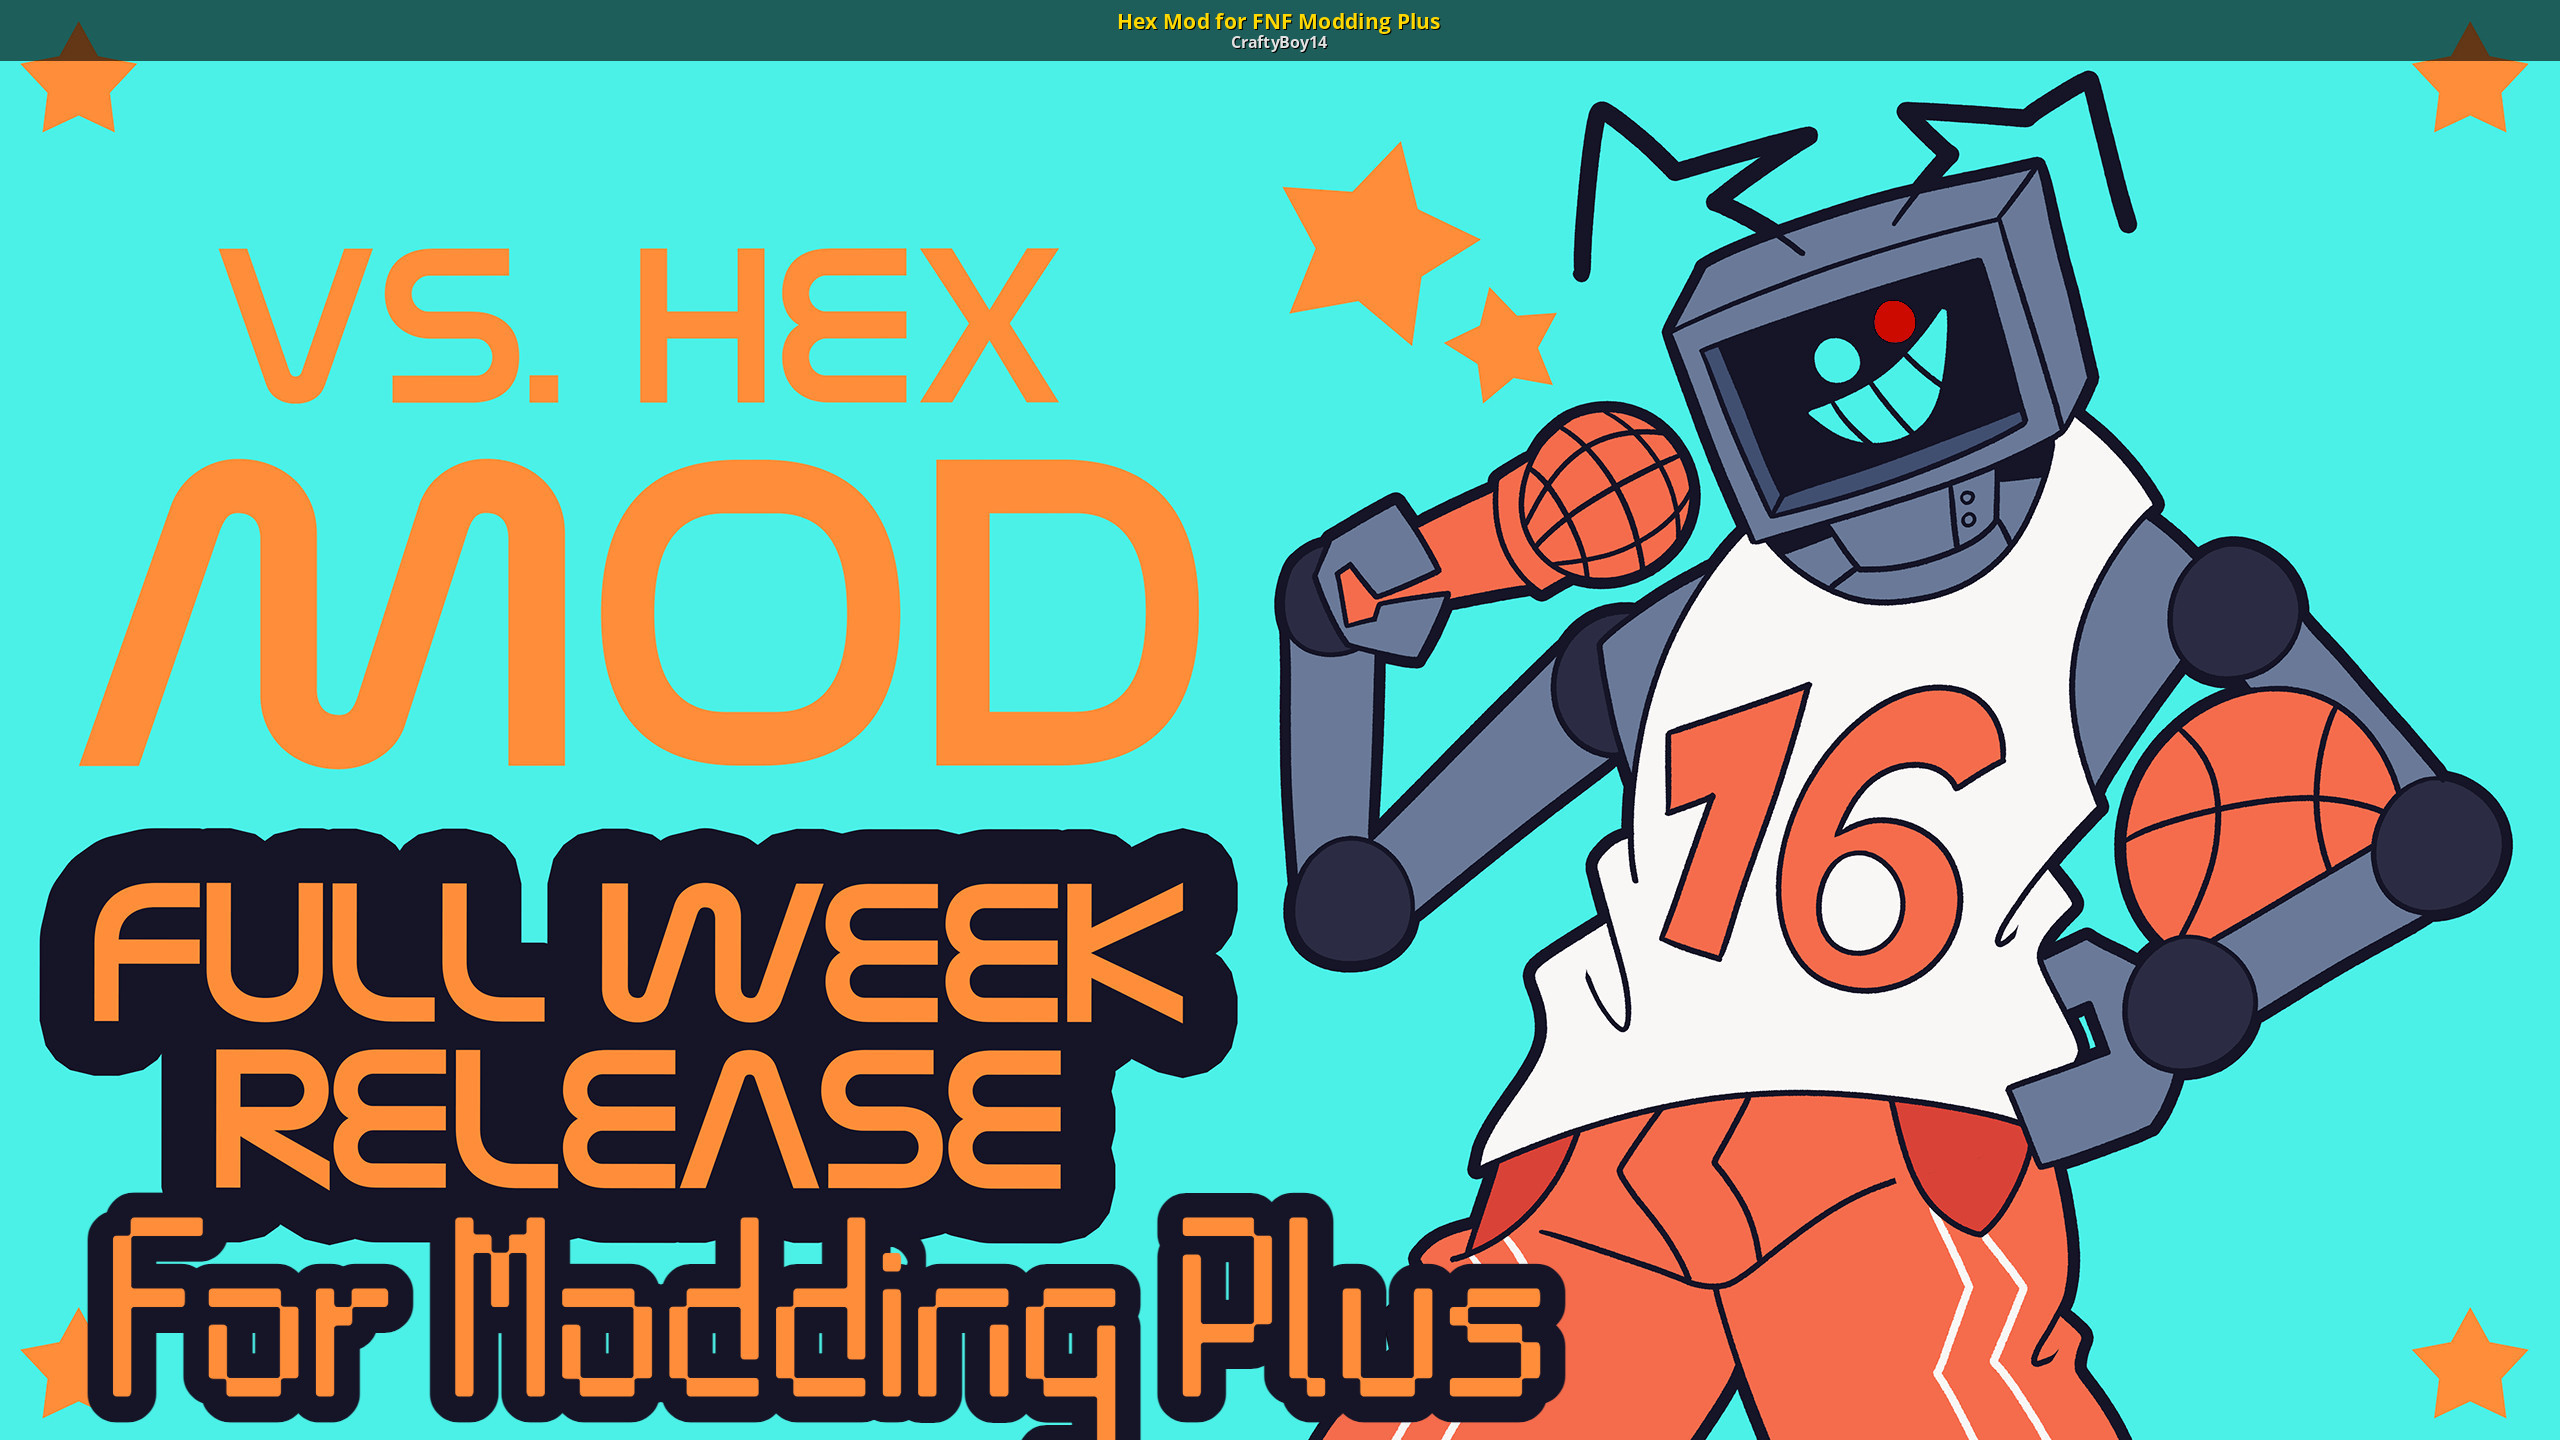 Hex Mod For Fnf Modding Plus Friday Night Funkin Mods